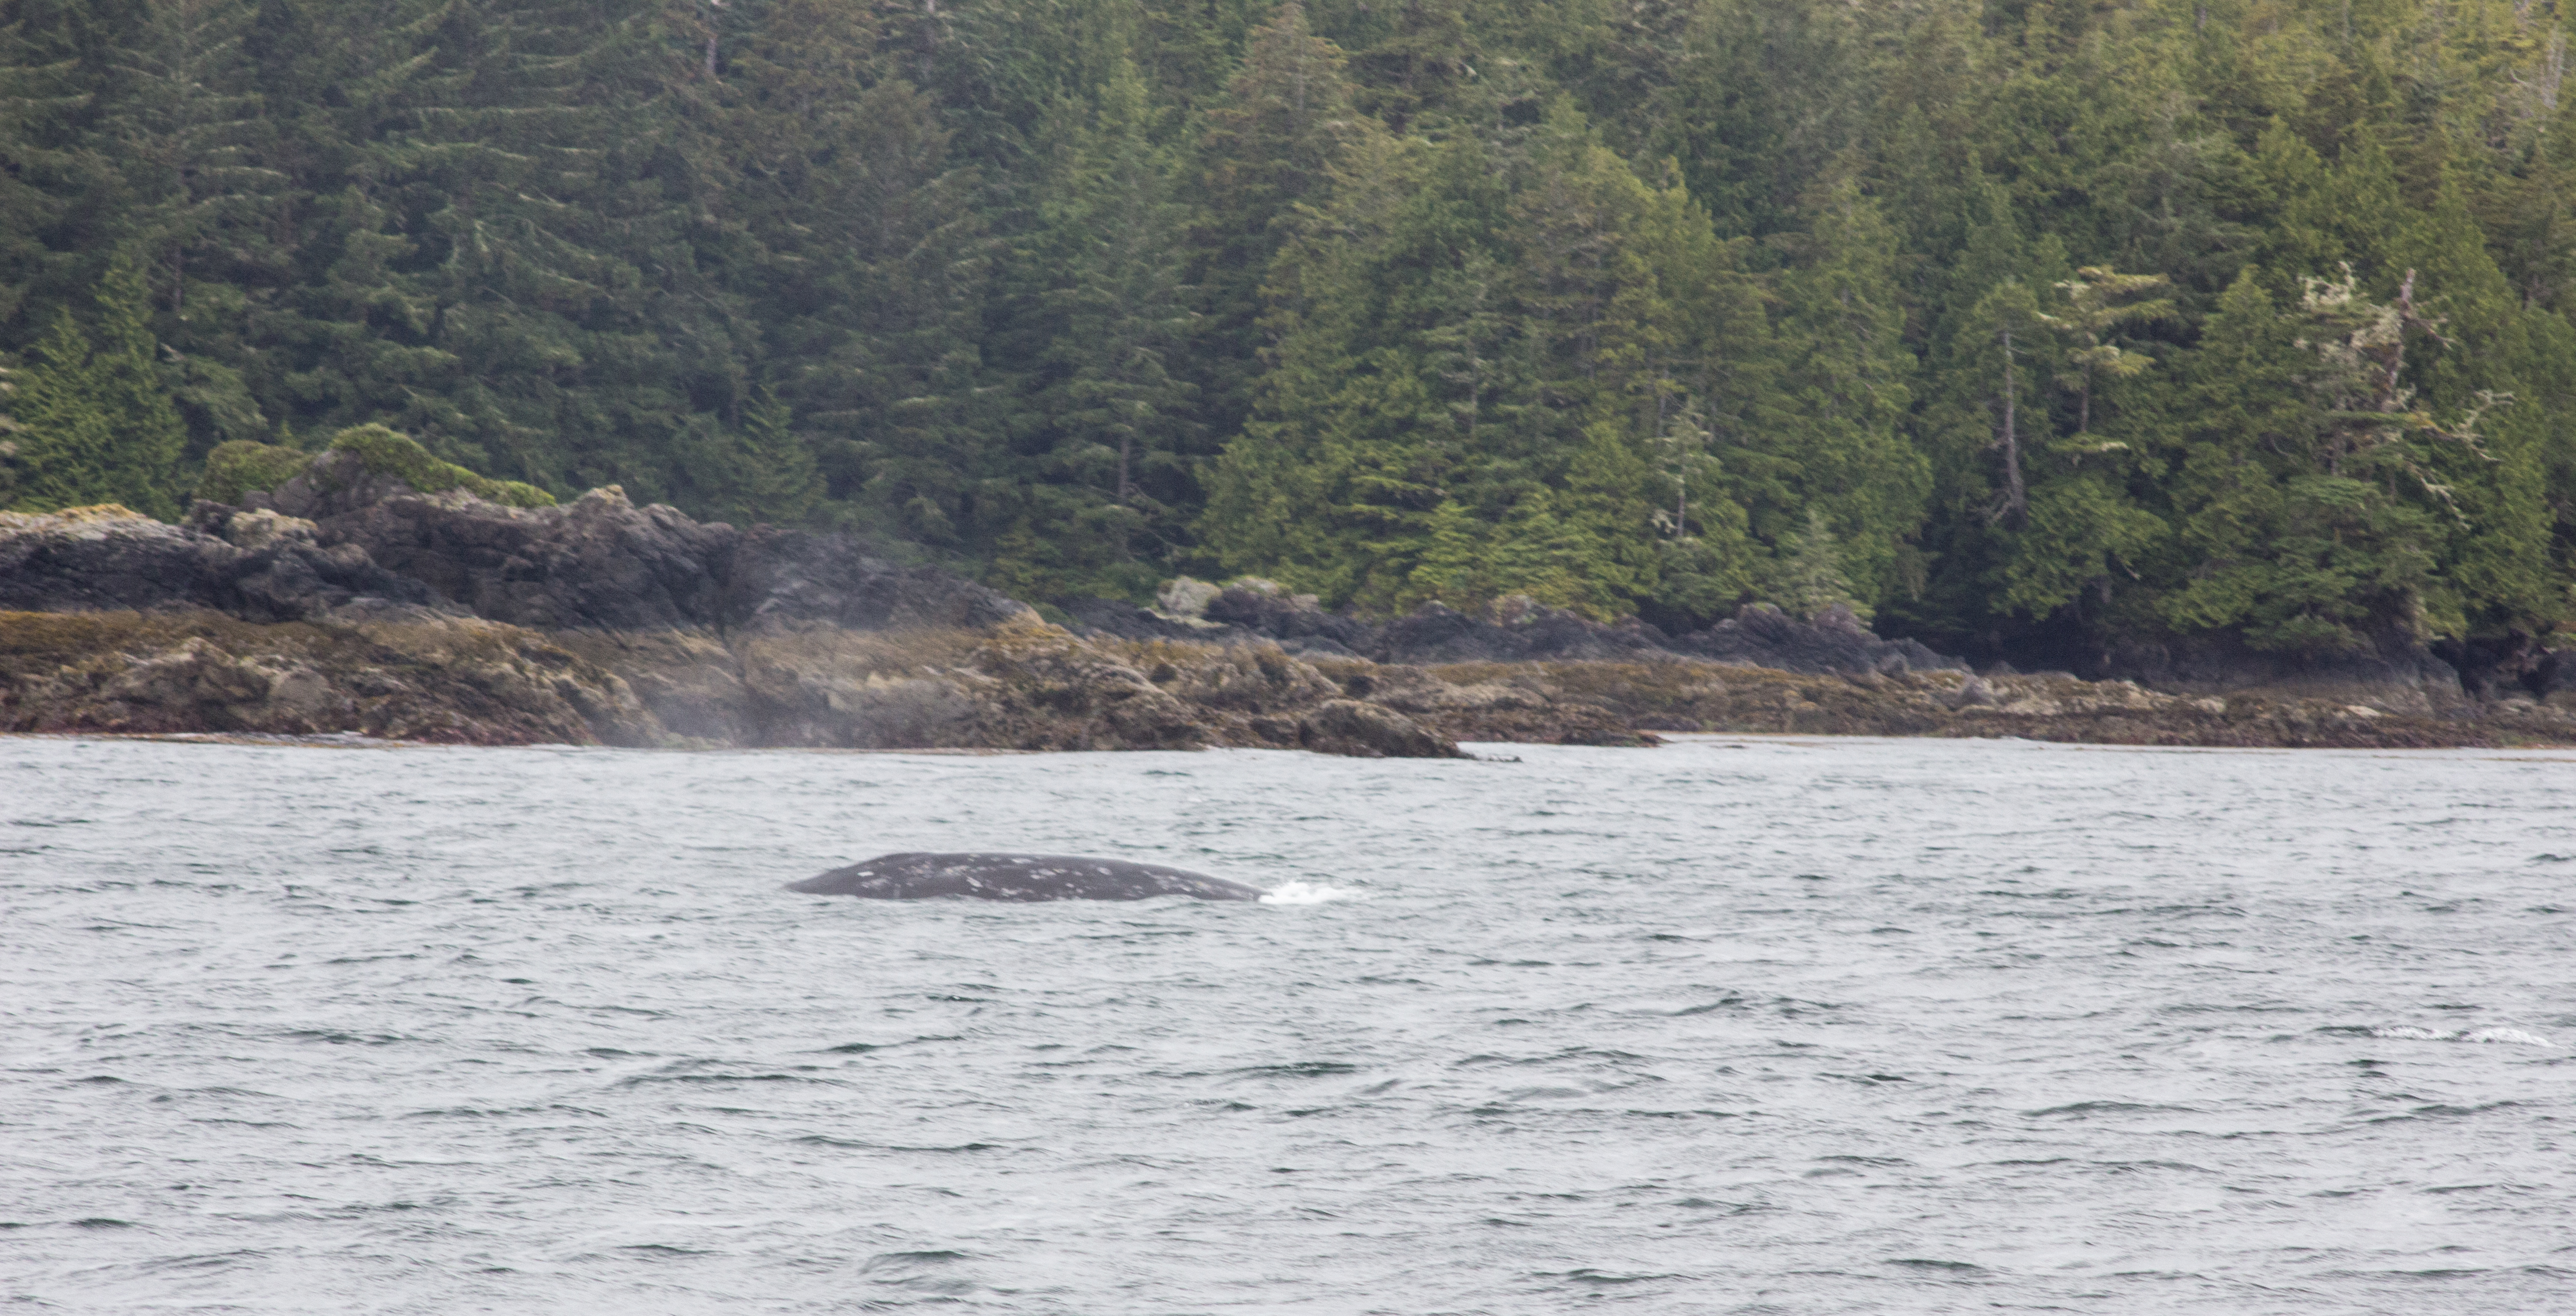 Spotting a whale on a whale watching tour with Jamie's Whaling Station, Tofino 